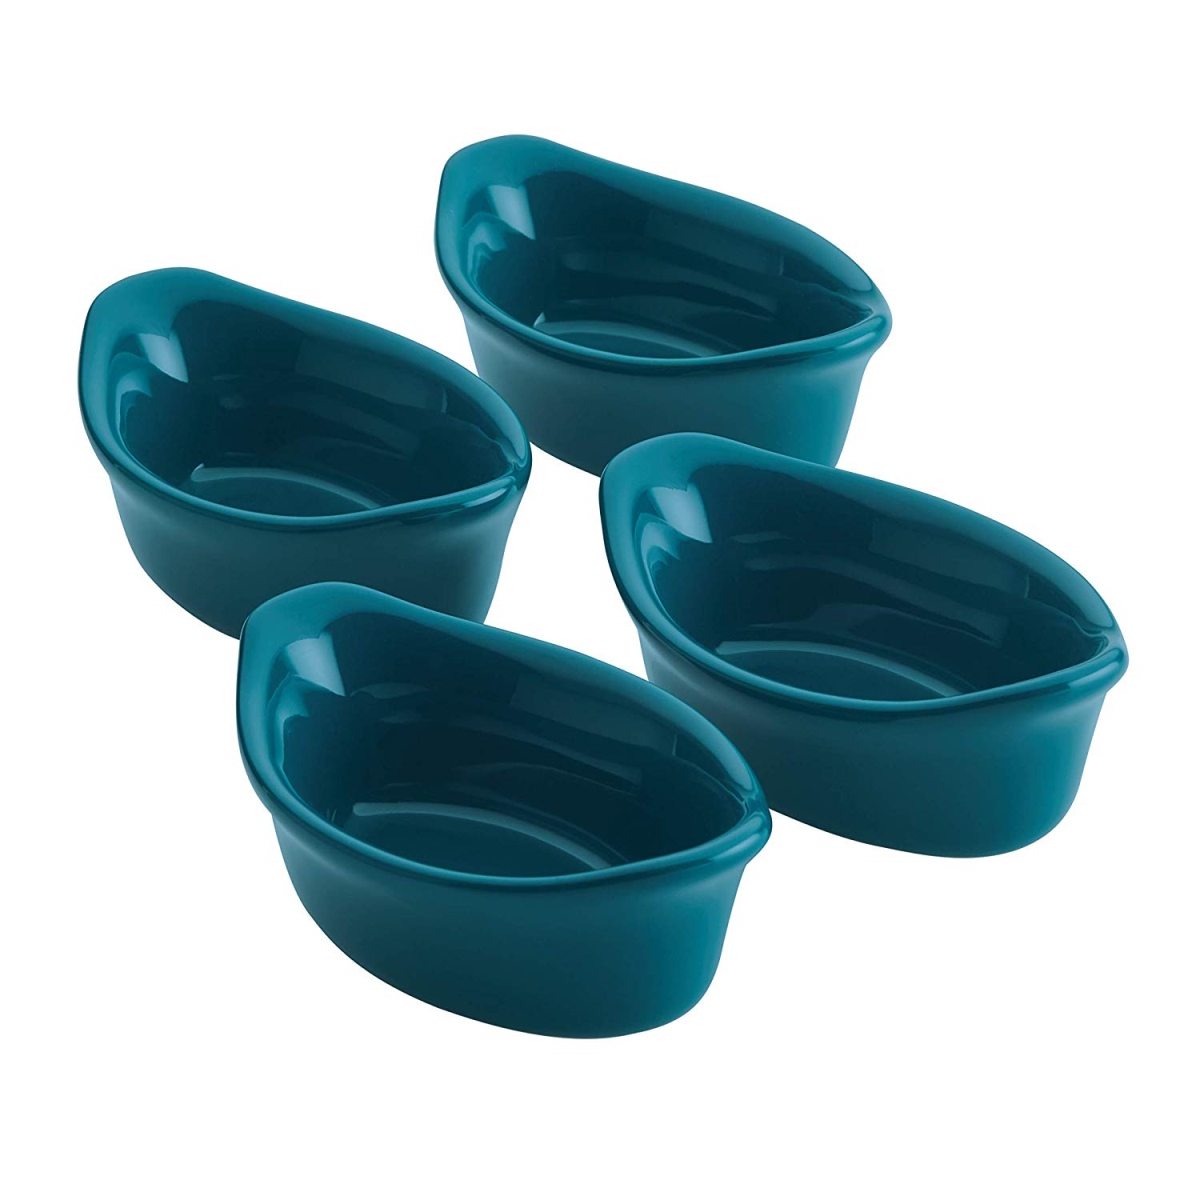 47862 Ceramics Oval Dipping Cups, Teal - 4 Piece